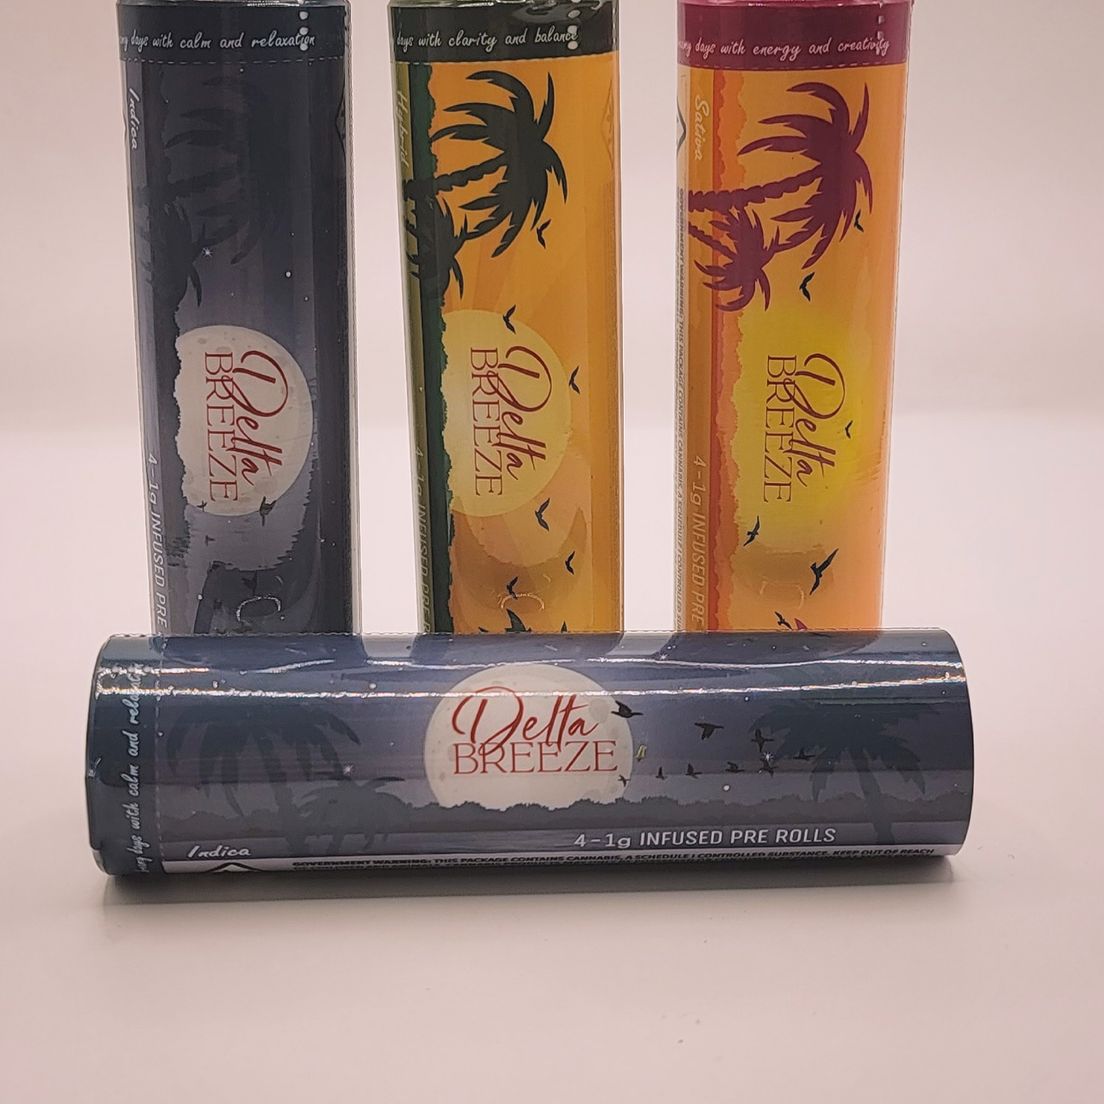 *Deal! $109 Mix n' Match Any (3) 4g Infused Preroll Packs by Delta Breeze